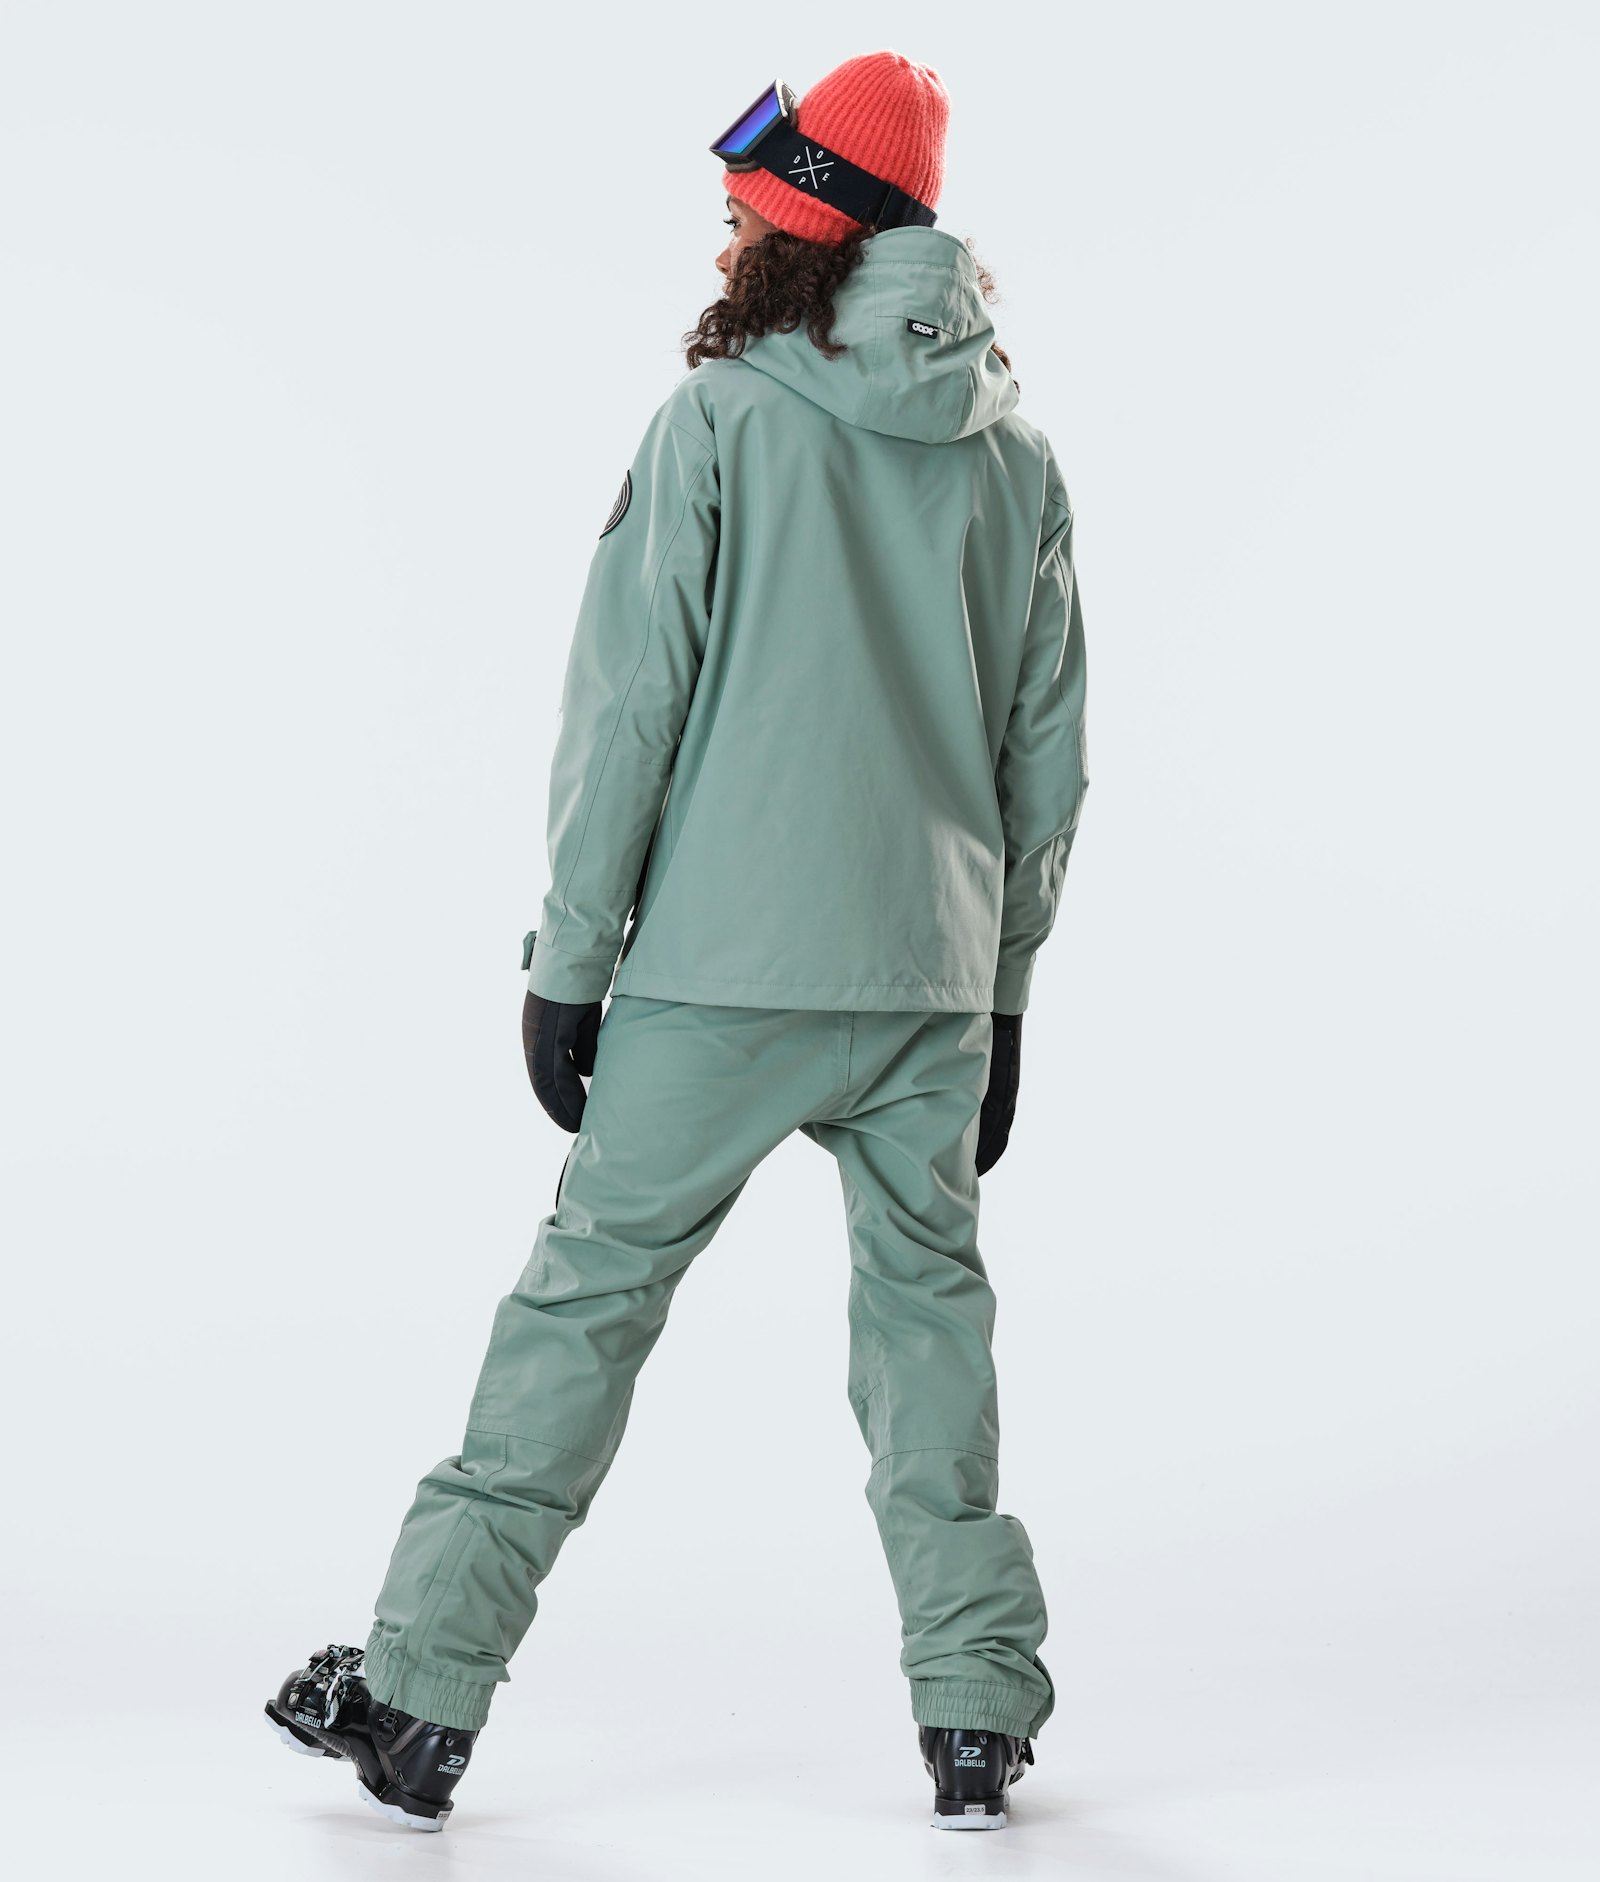 Dope Blizzard W Full Zip 2020 Giacca Sci Donna Faded Green